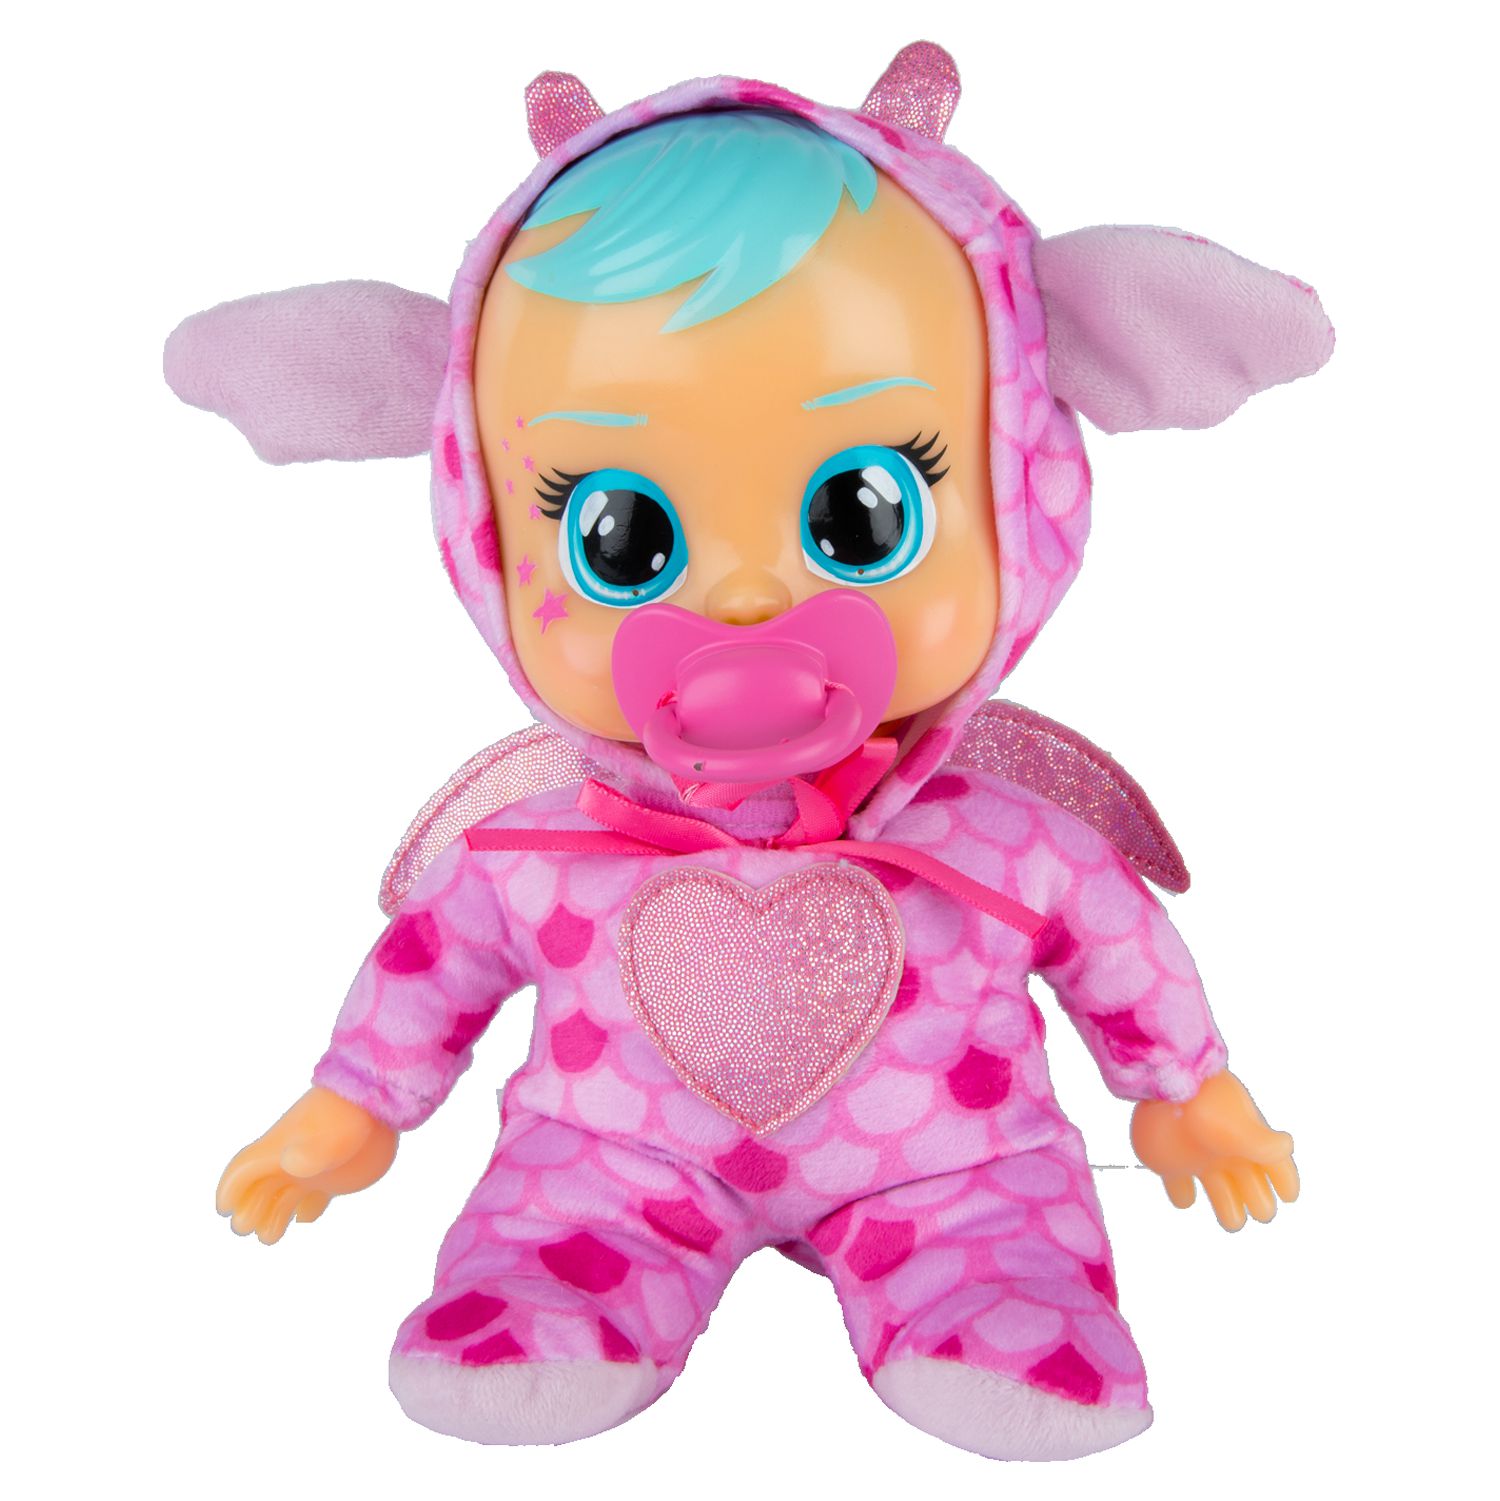 Cry Babies Tiny Cuddles 9 inch Baby Doll (Styles Vary) Ages 18+ months - image 2 of 11